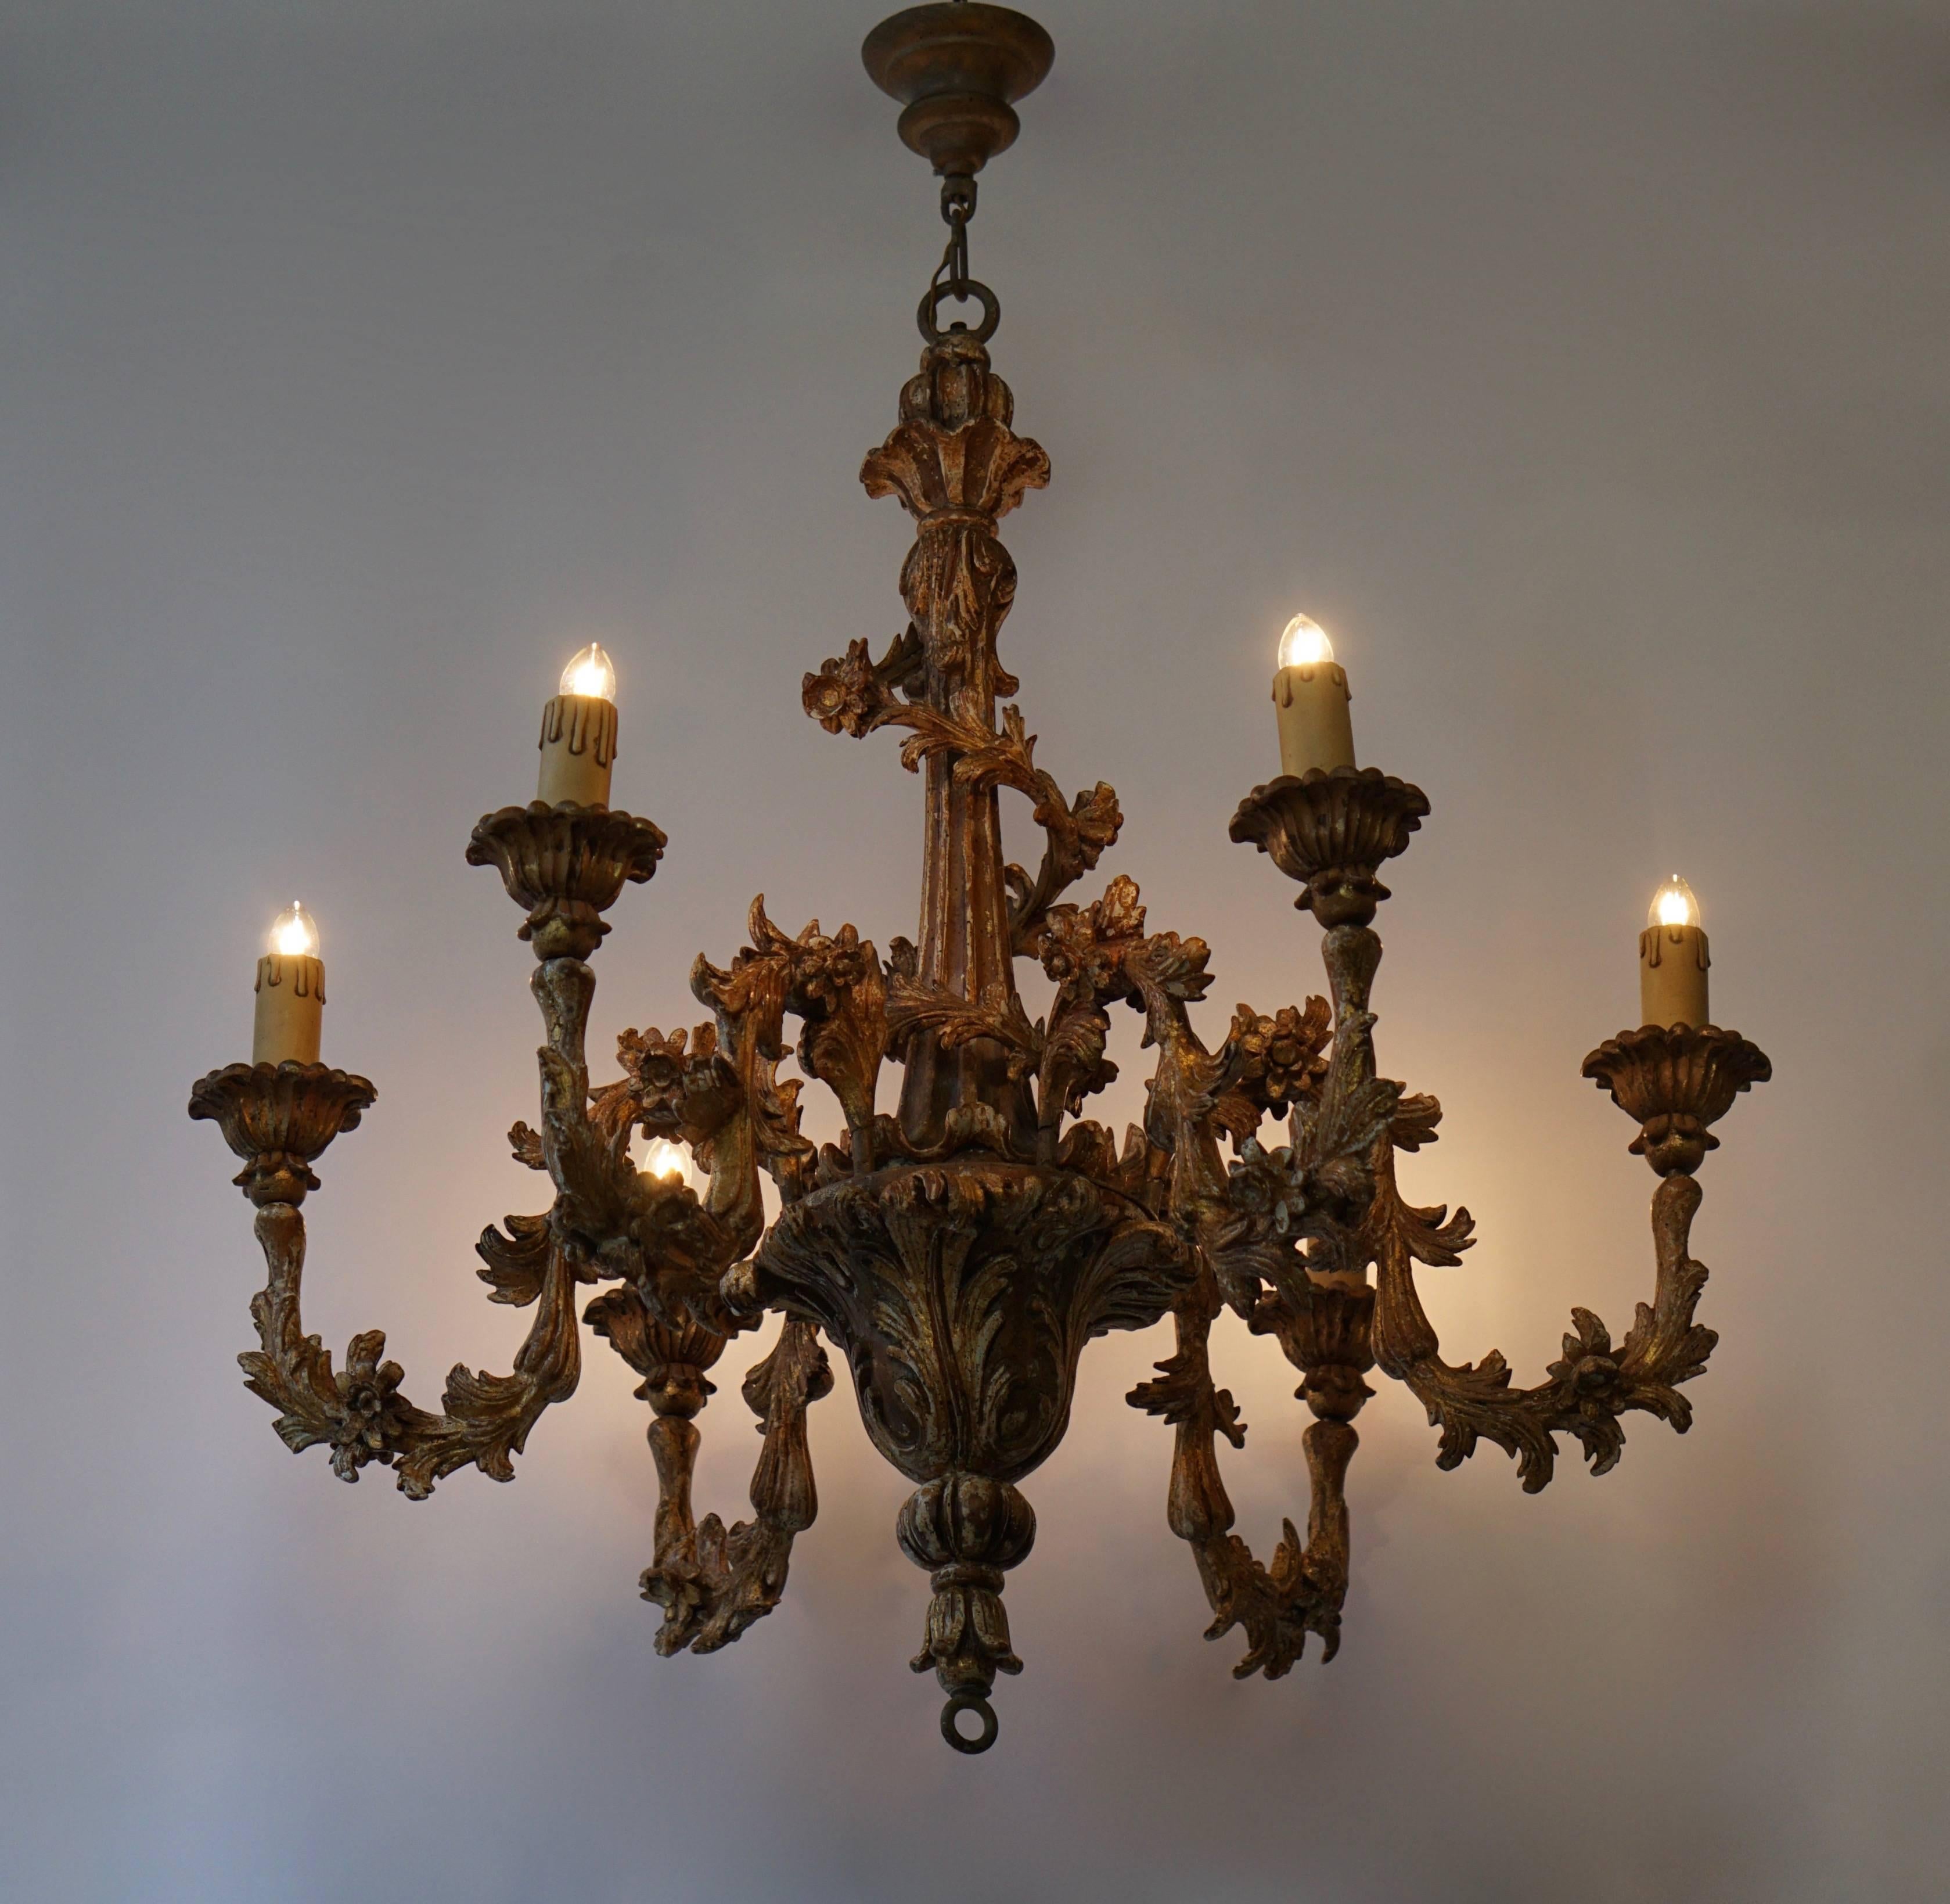 Elegant six lights carved giltwood and plaster chandelier from Italy with a beautiful patine, circa 1940. Not re-wired to US standard, this old world fixture would make a great statement in a master bedroom or a dining room.
Diameter 72 cm.
Height